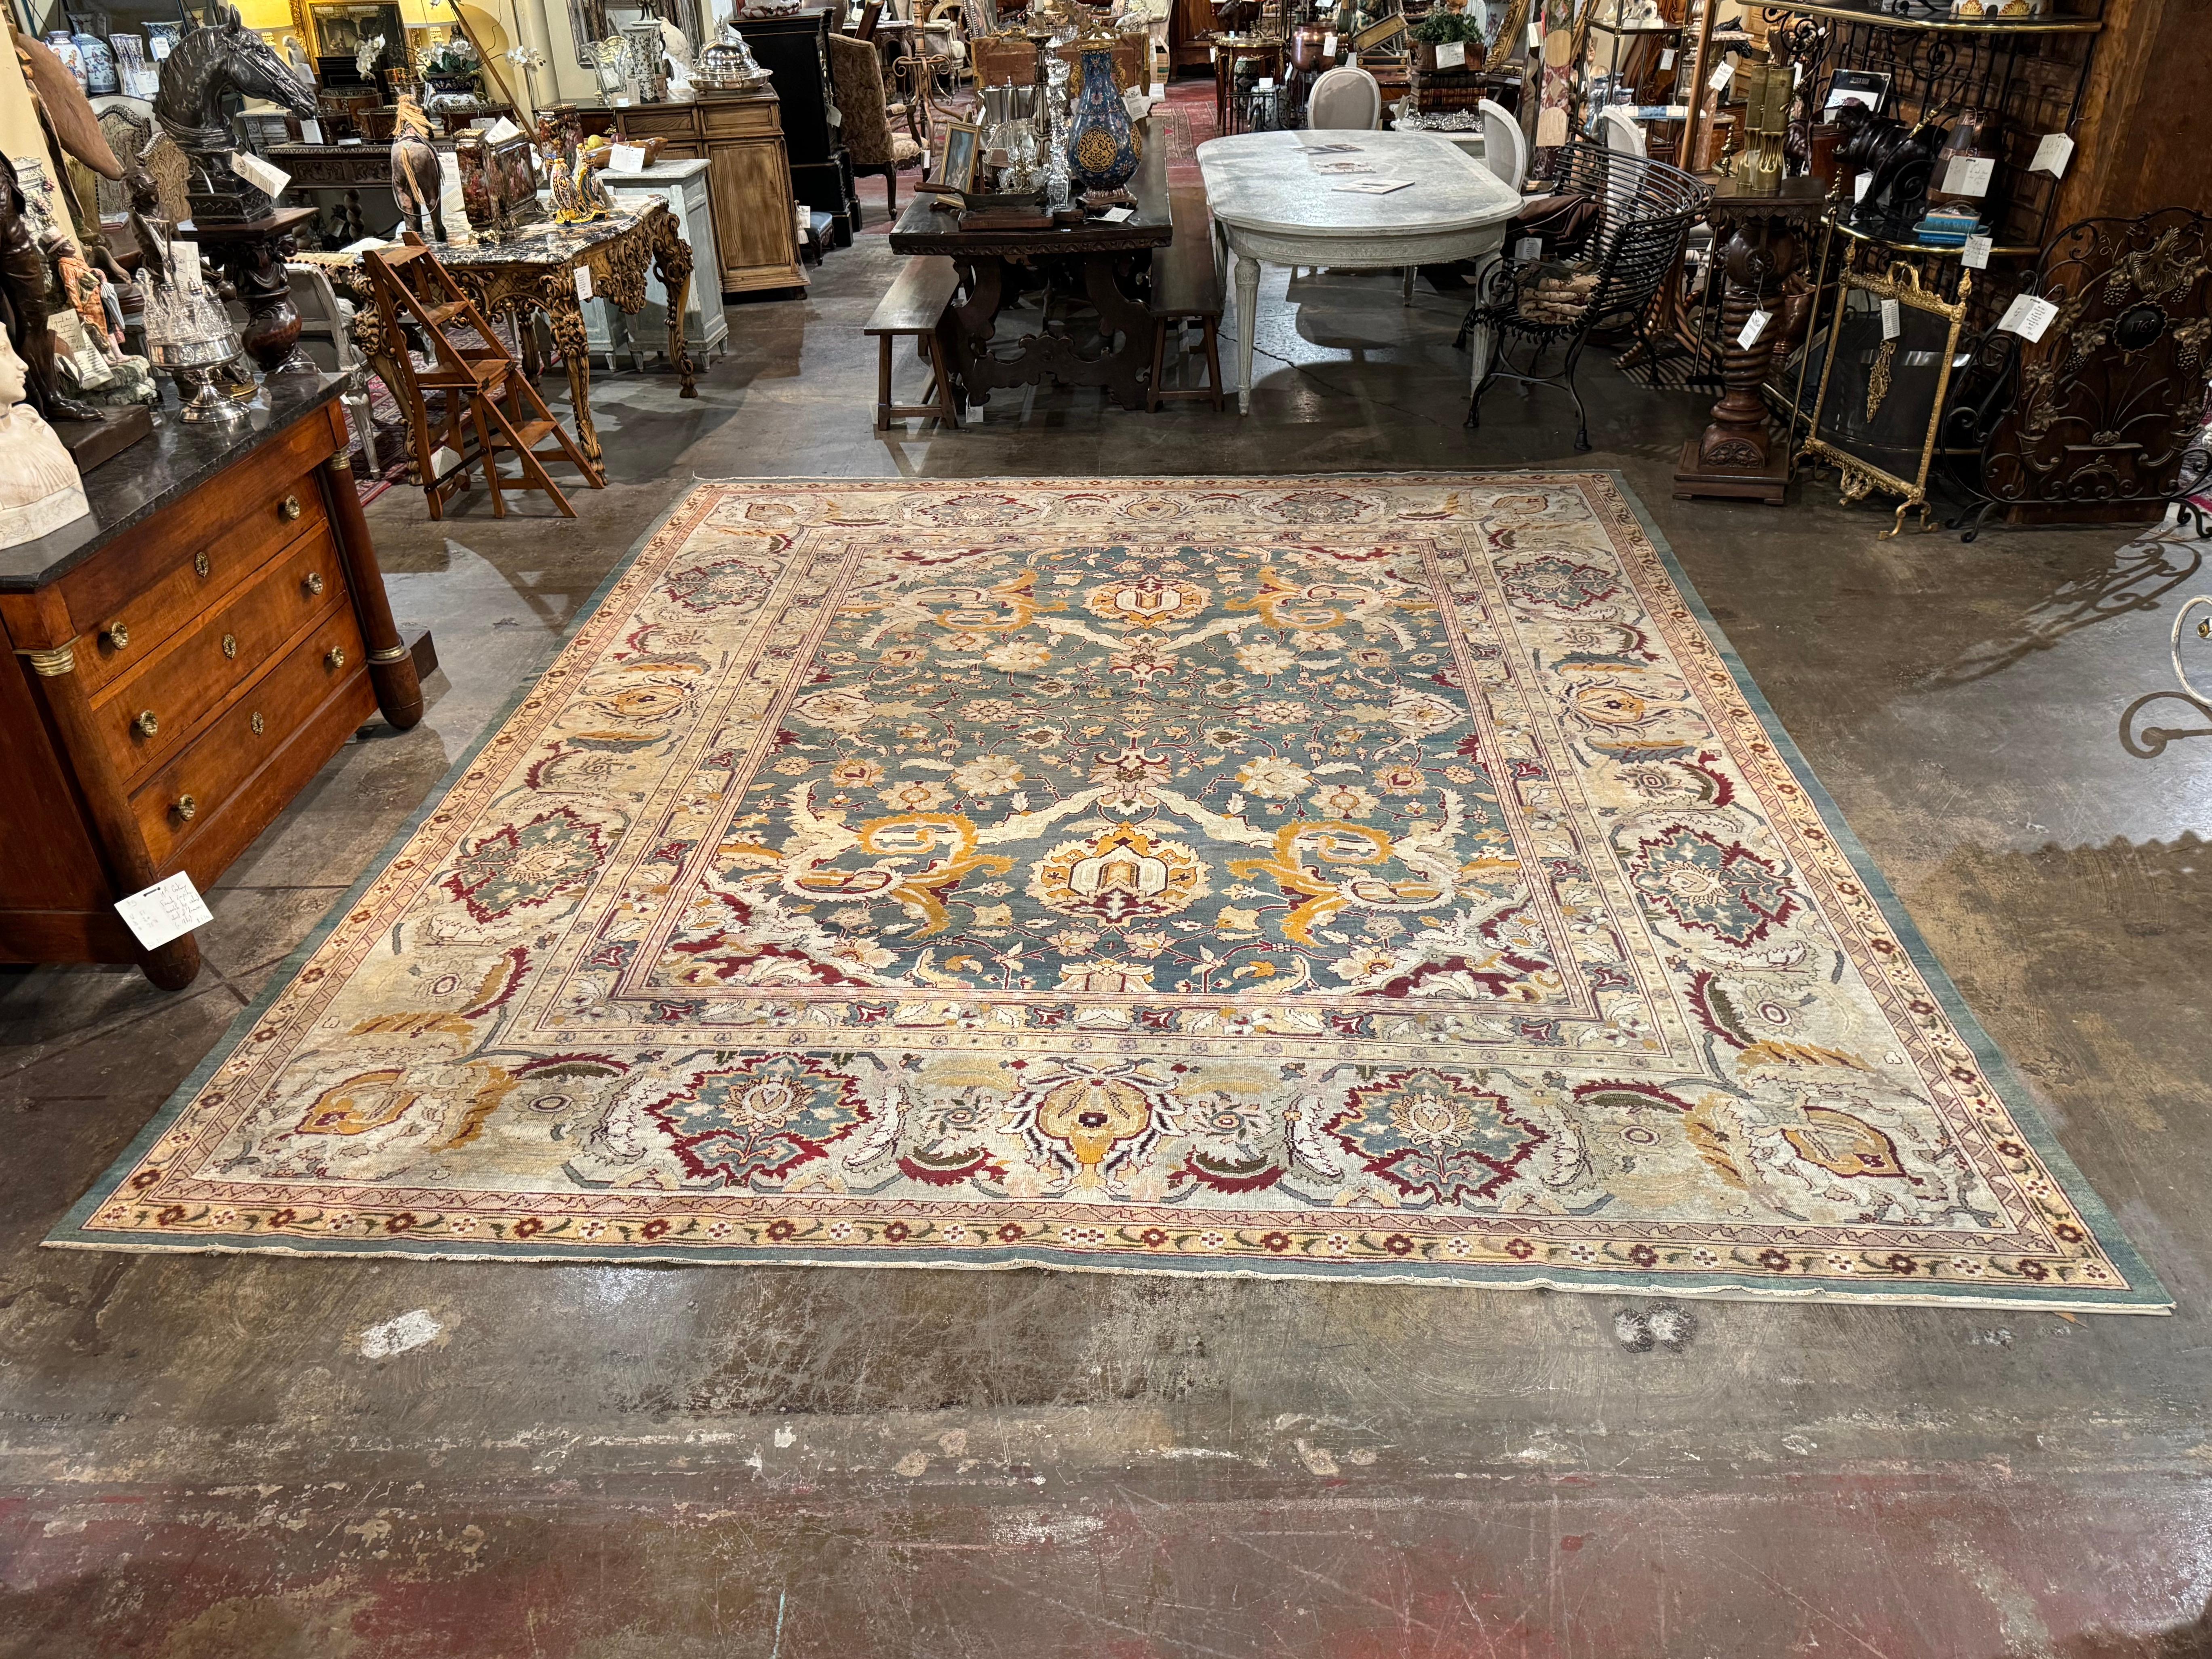 This antique oriental style rug would make a great addition to any den, living room, or dining room. Hand knotted in Agra India circa 1920, the area rug features several intricate borders, the largest featuring floral and foliage motifs throughout.